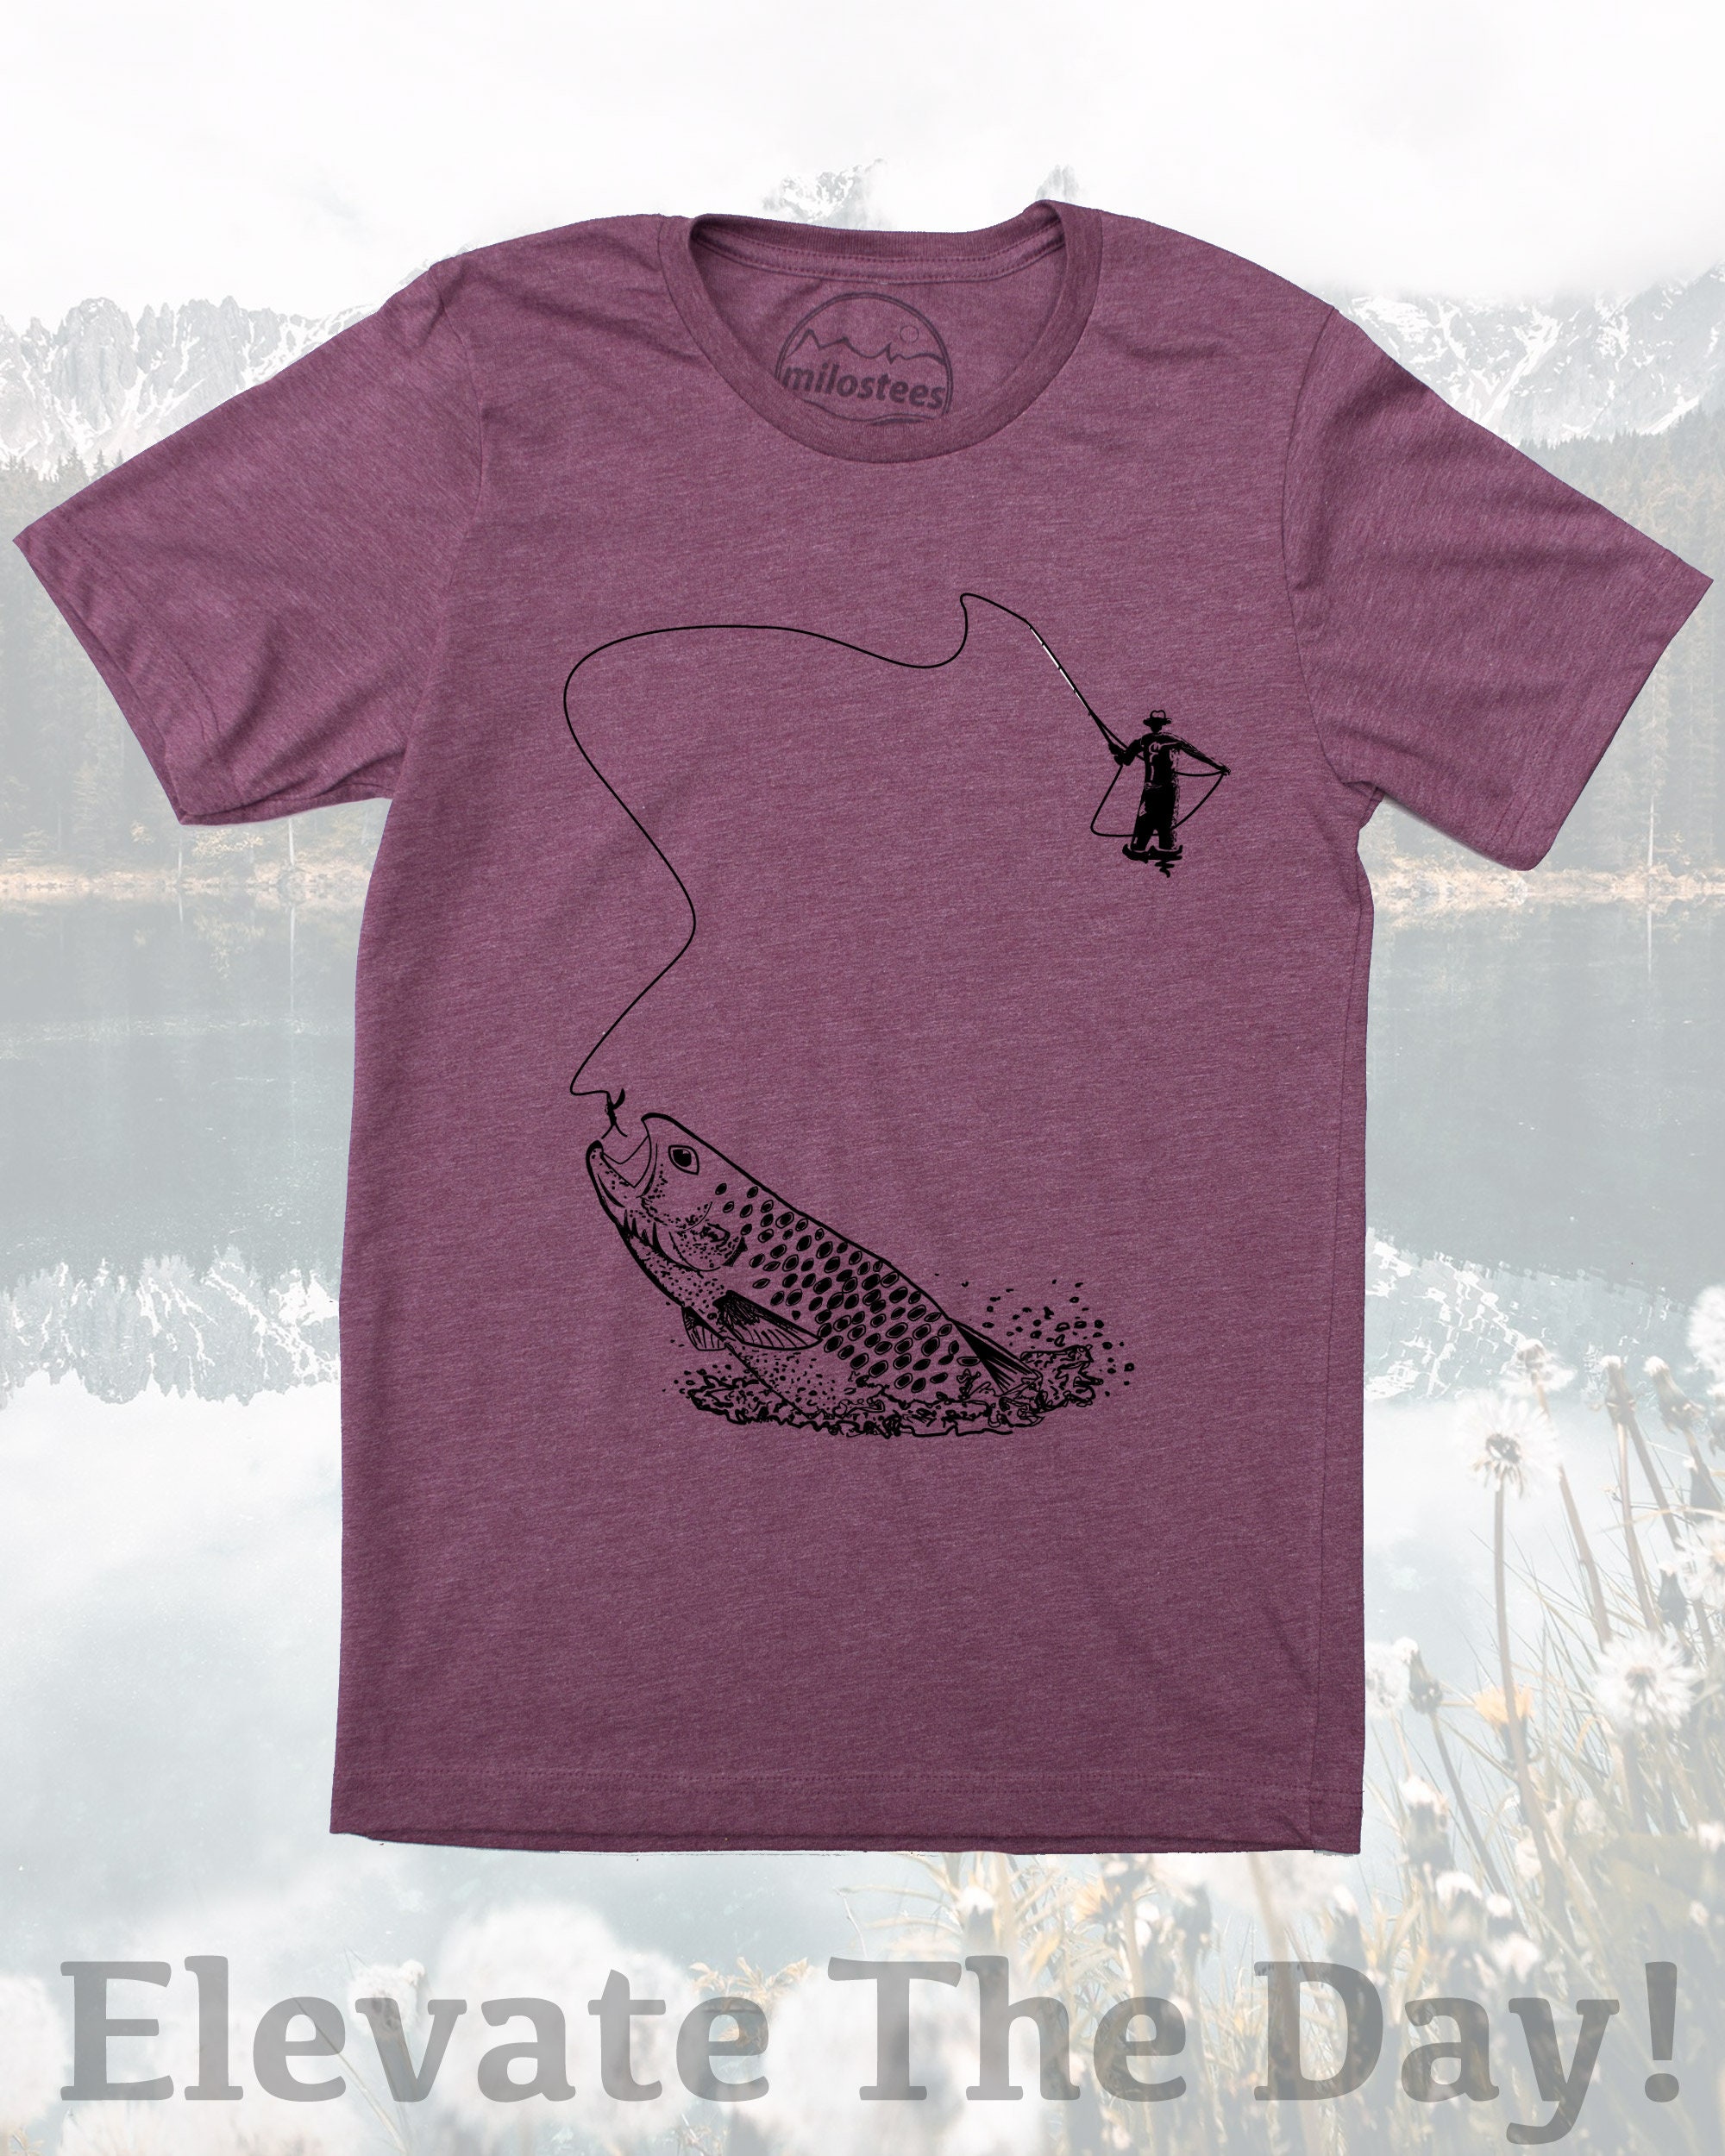 Fly Fishing Shirt, Illustration of Fisherman Casting a Line for a Fish  Strike, Screen Print on Soft Blue Tee by American Apparel, Fish Gift 